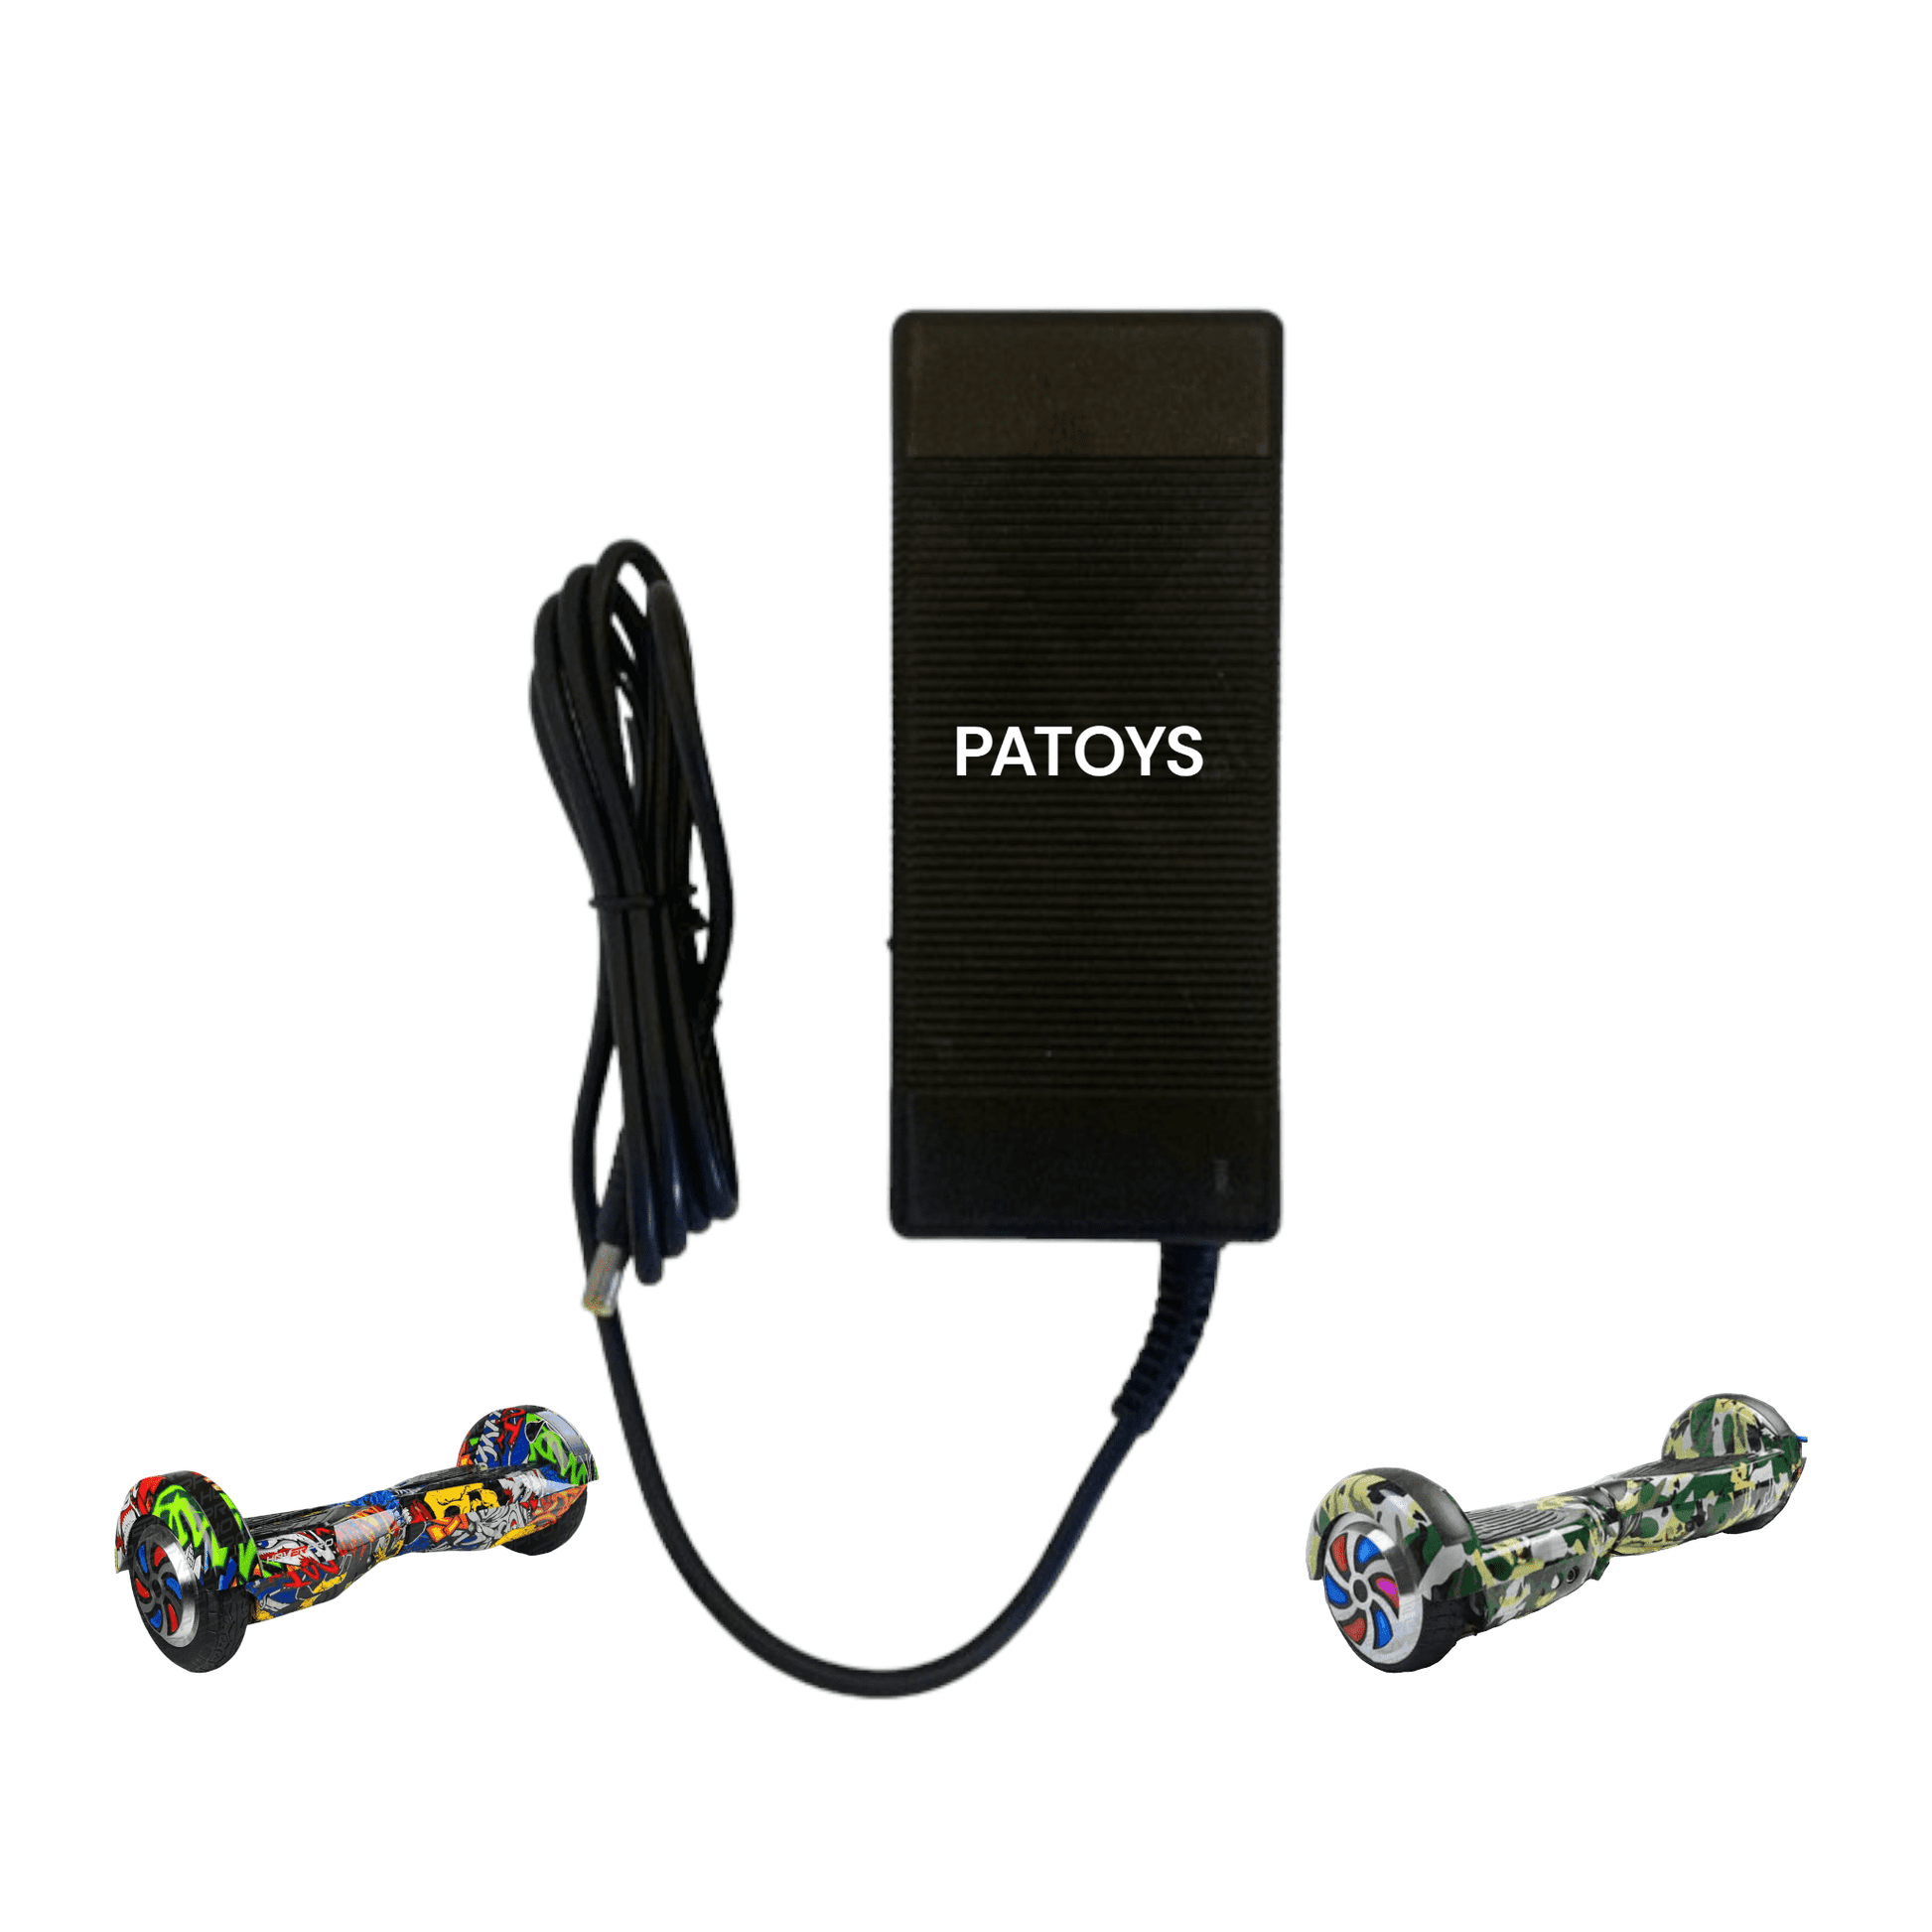 PATOYS | 42 Volt 1.6 Amp original power charger for ebike, ride on bikes, hoverboard, with DC point Charger PATOYS